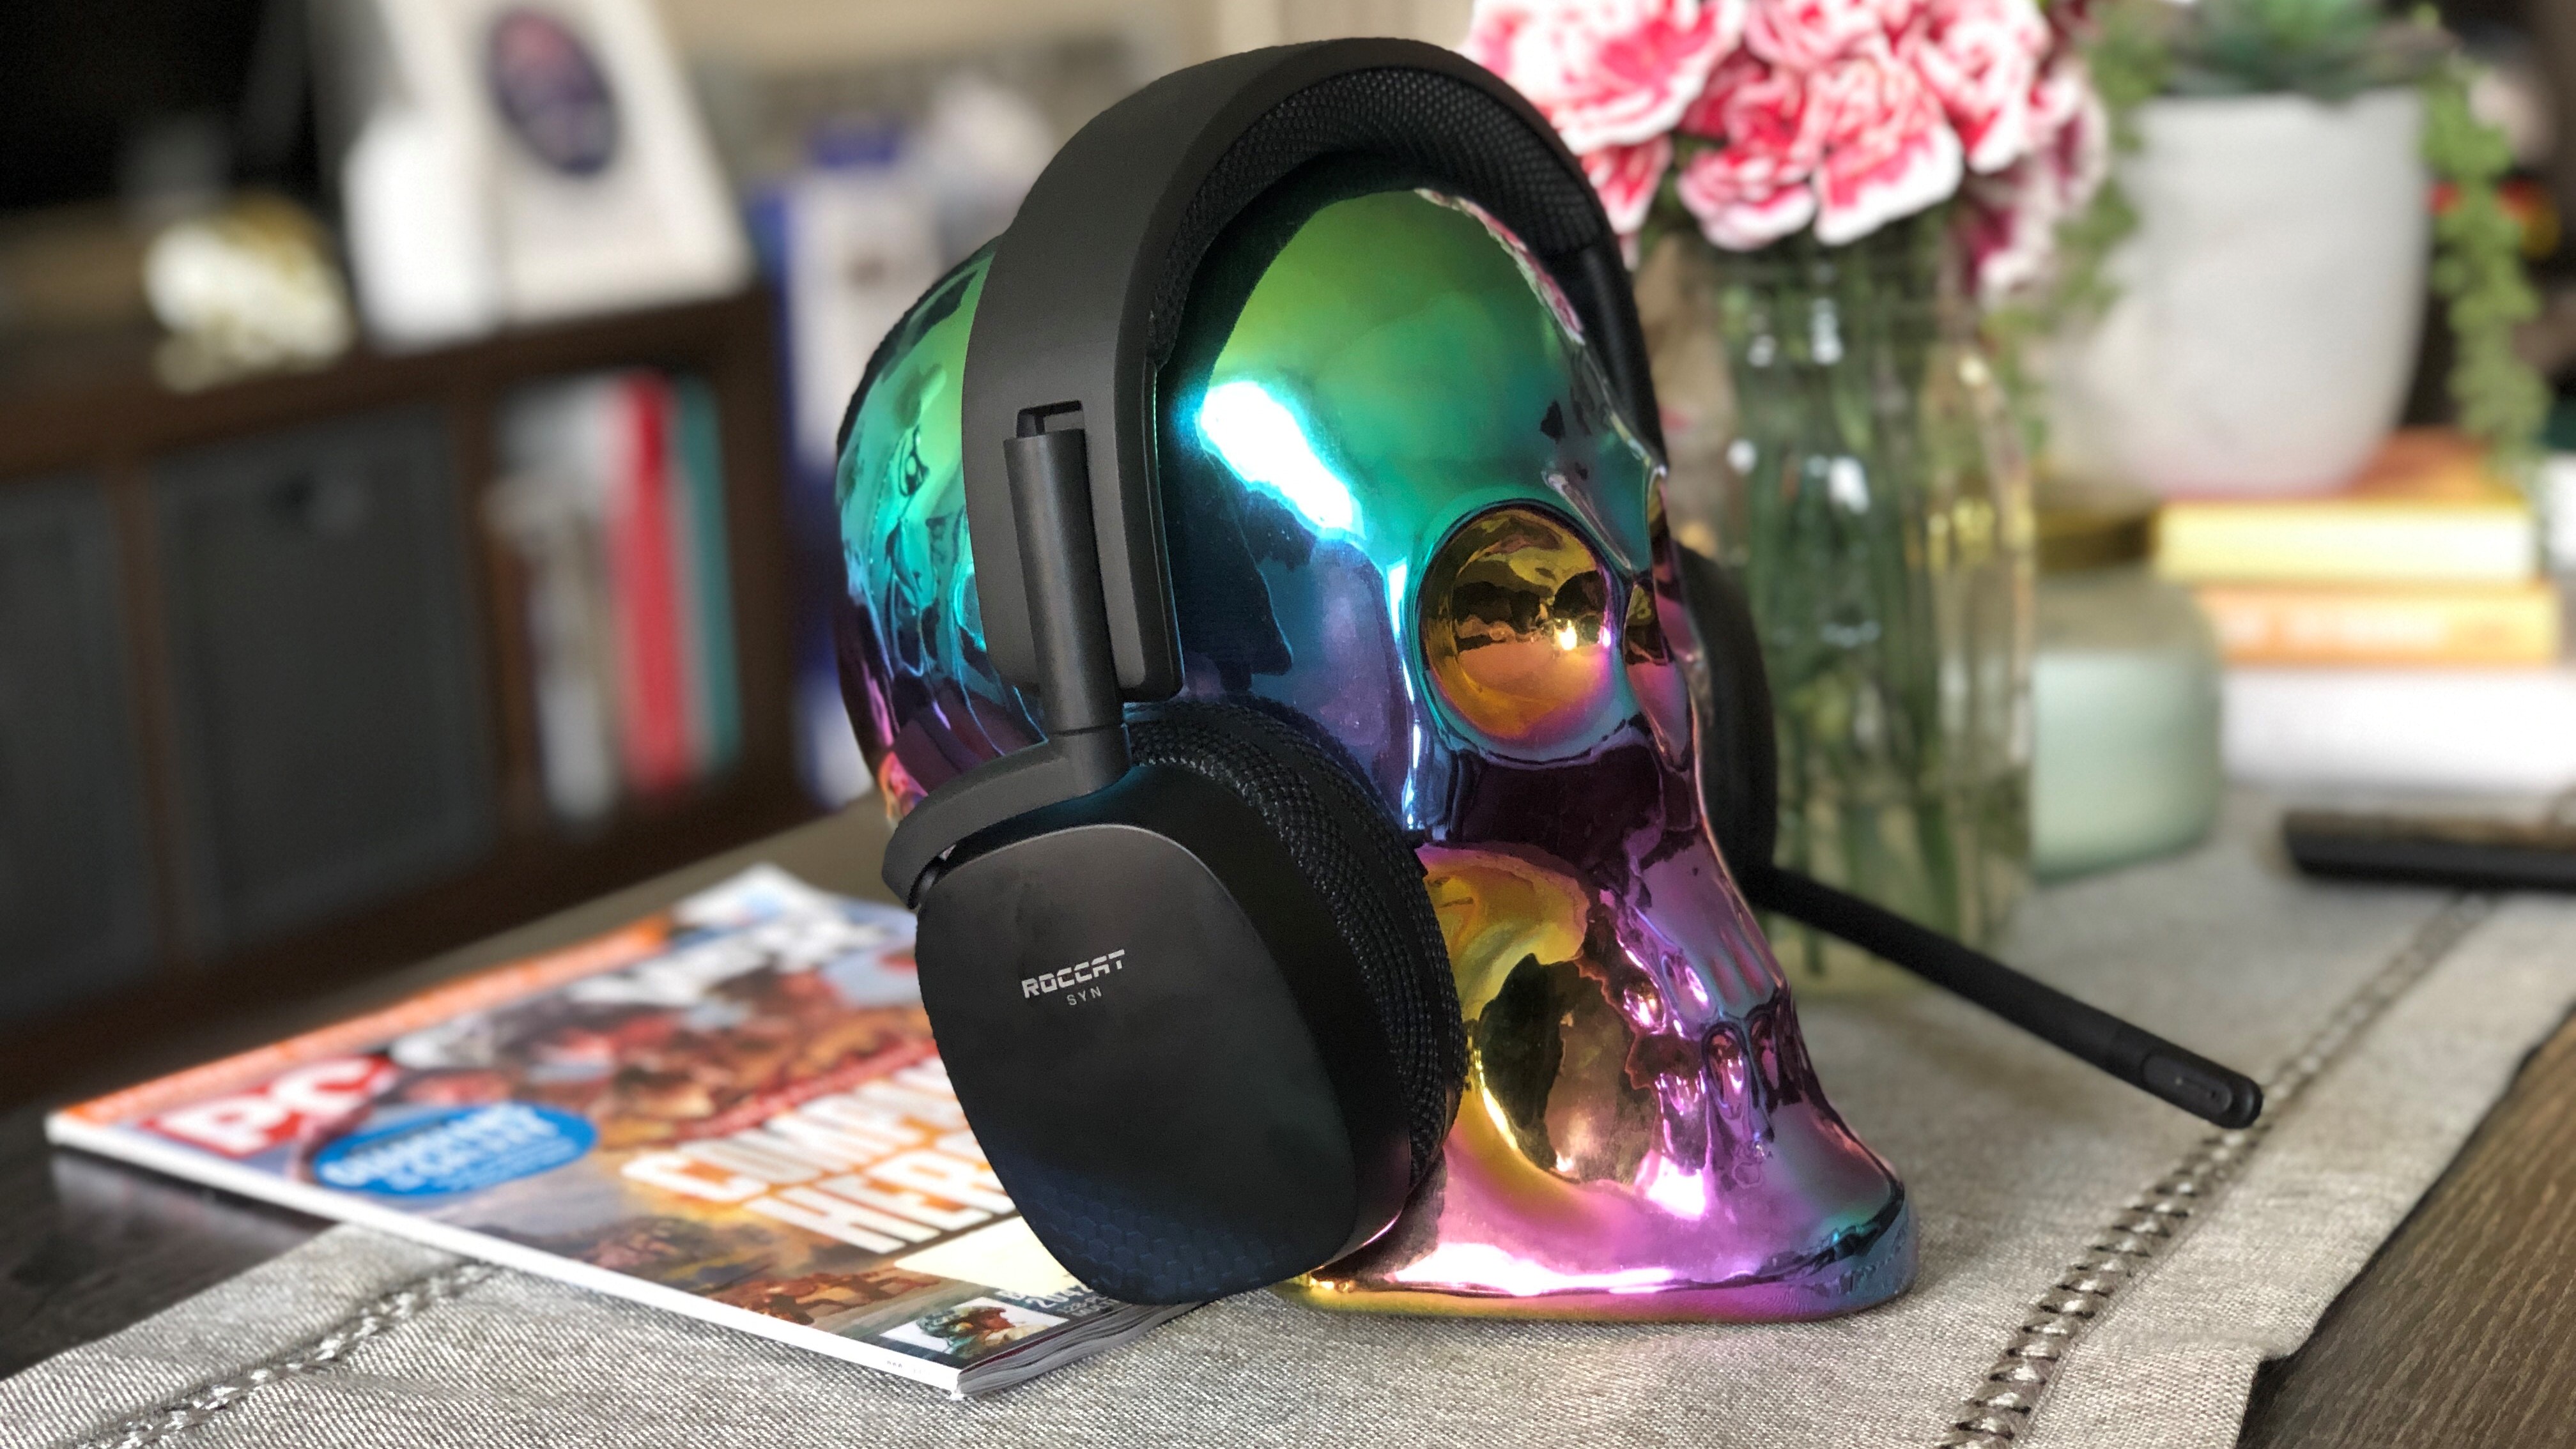 Roccat SYN Pro Air wireless headset